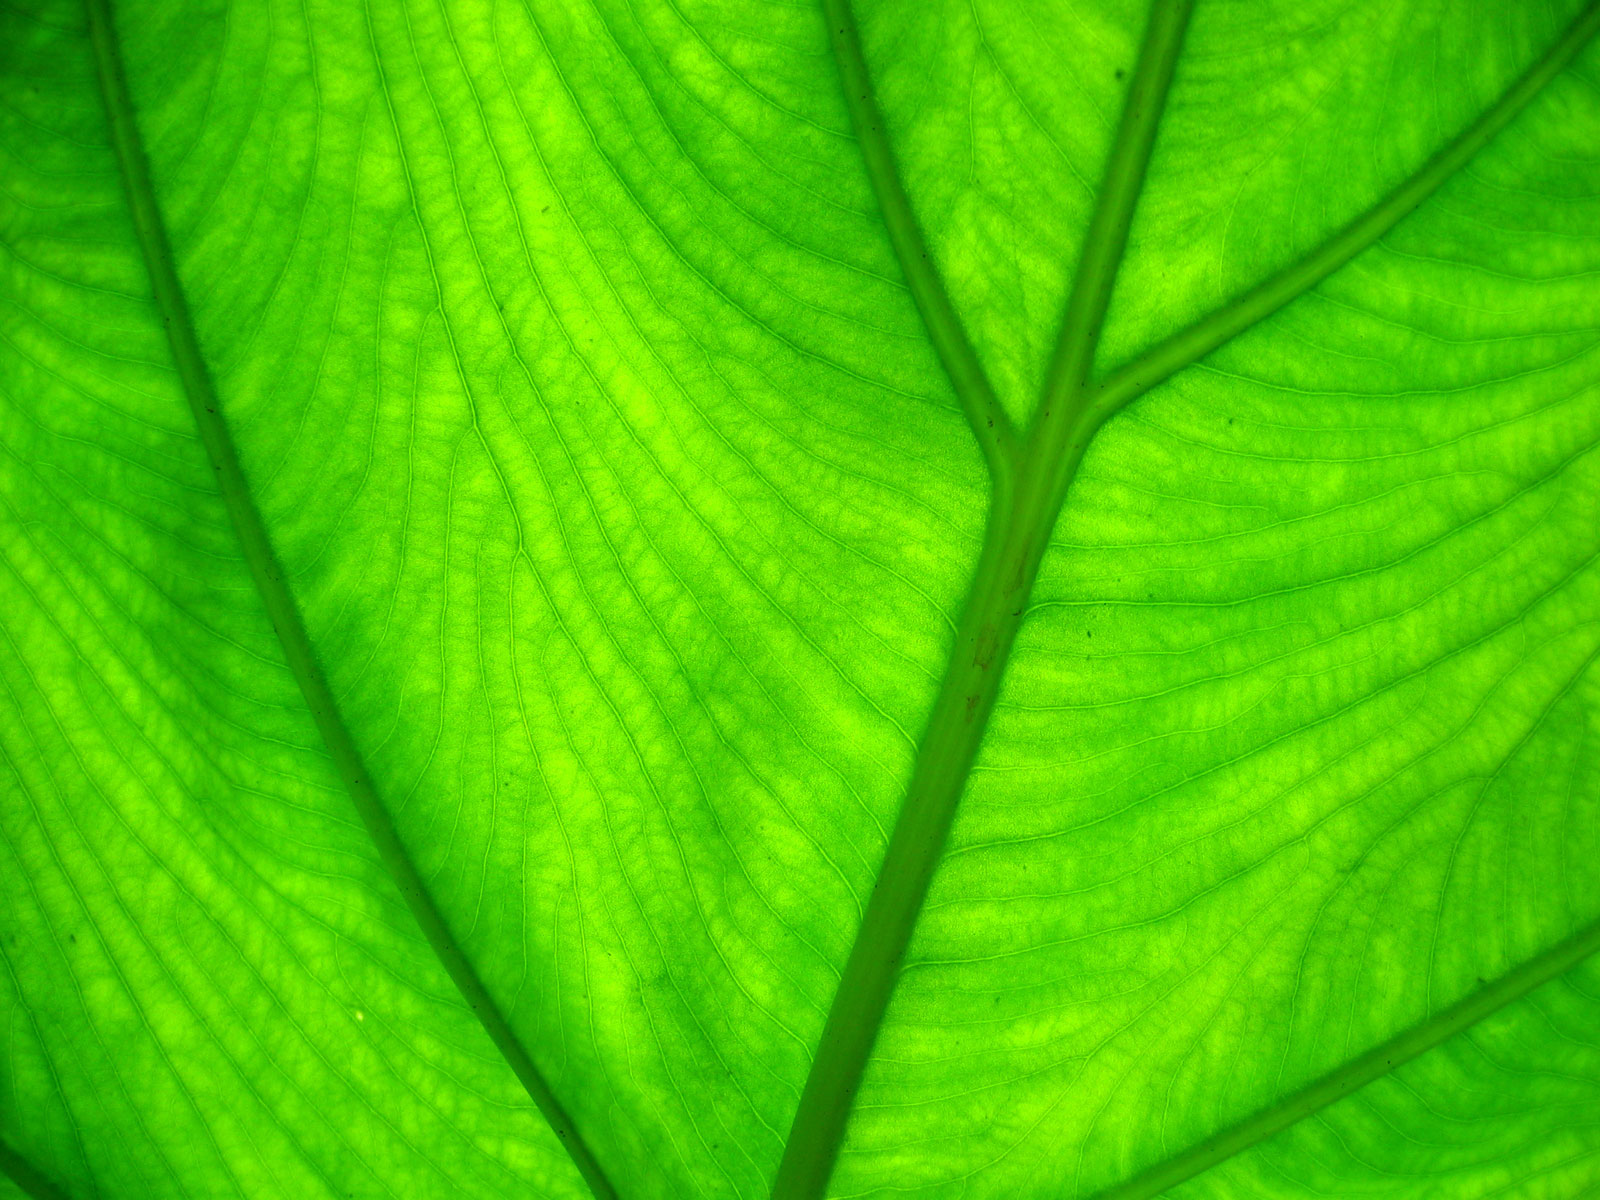 Black and White Wallpapers Green Leaf Wallpaper